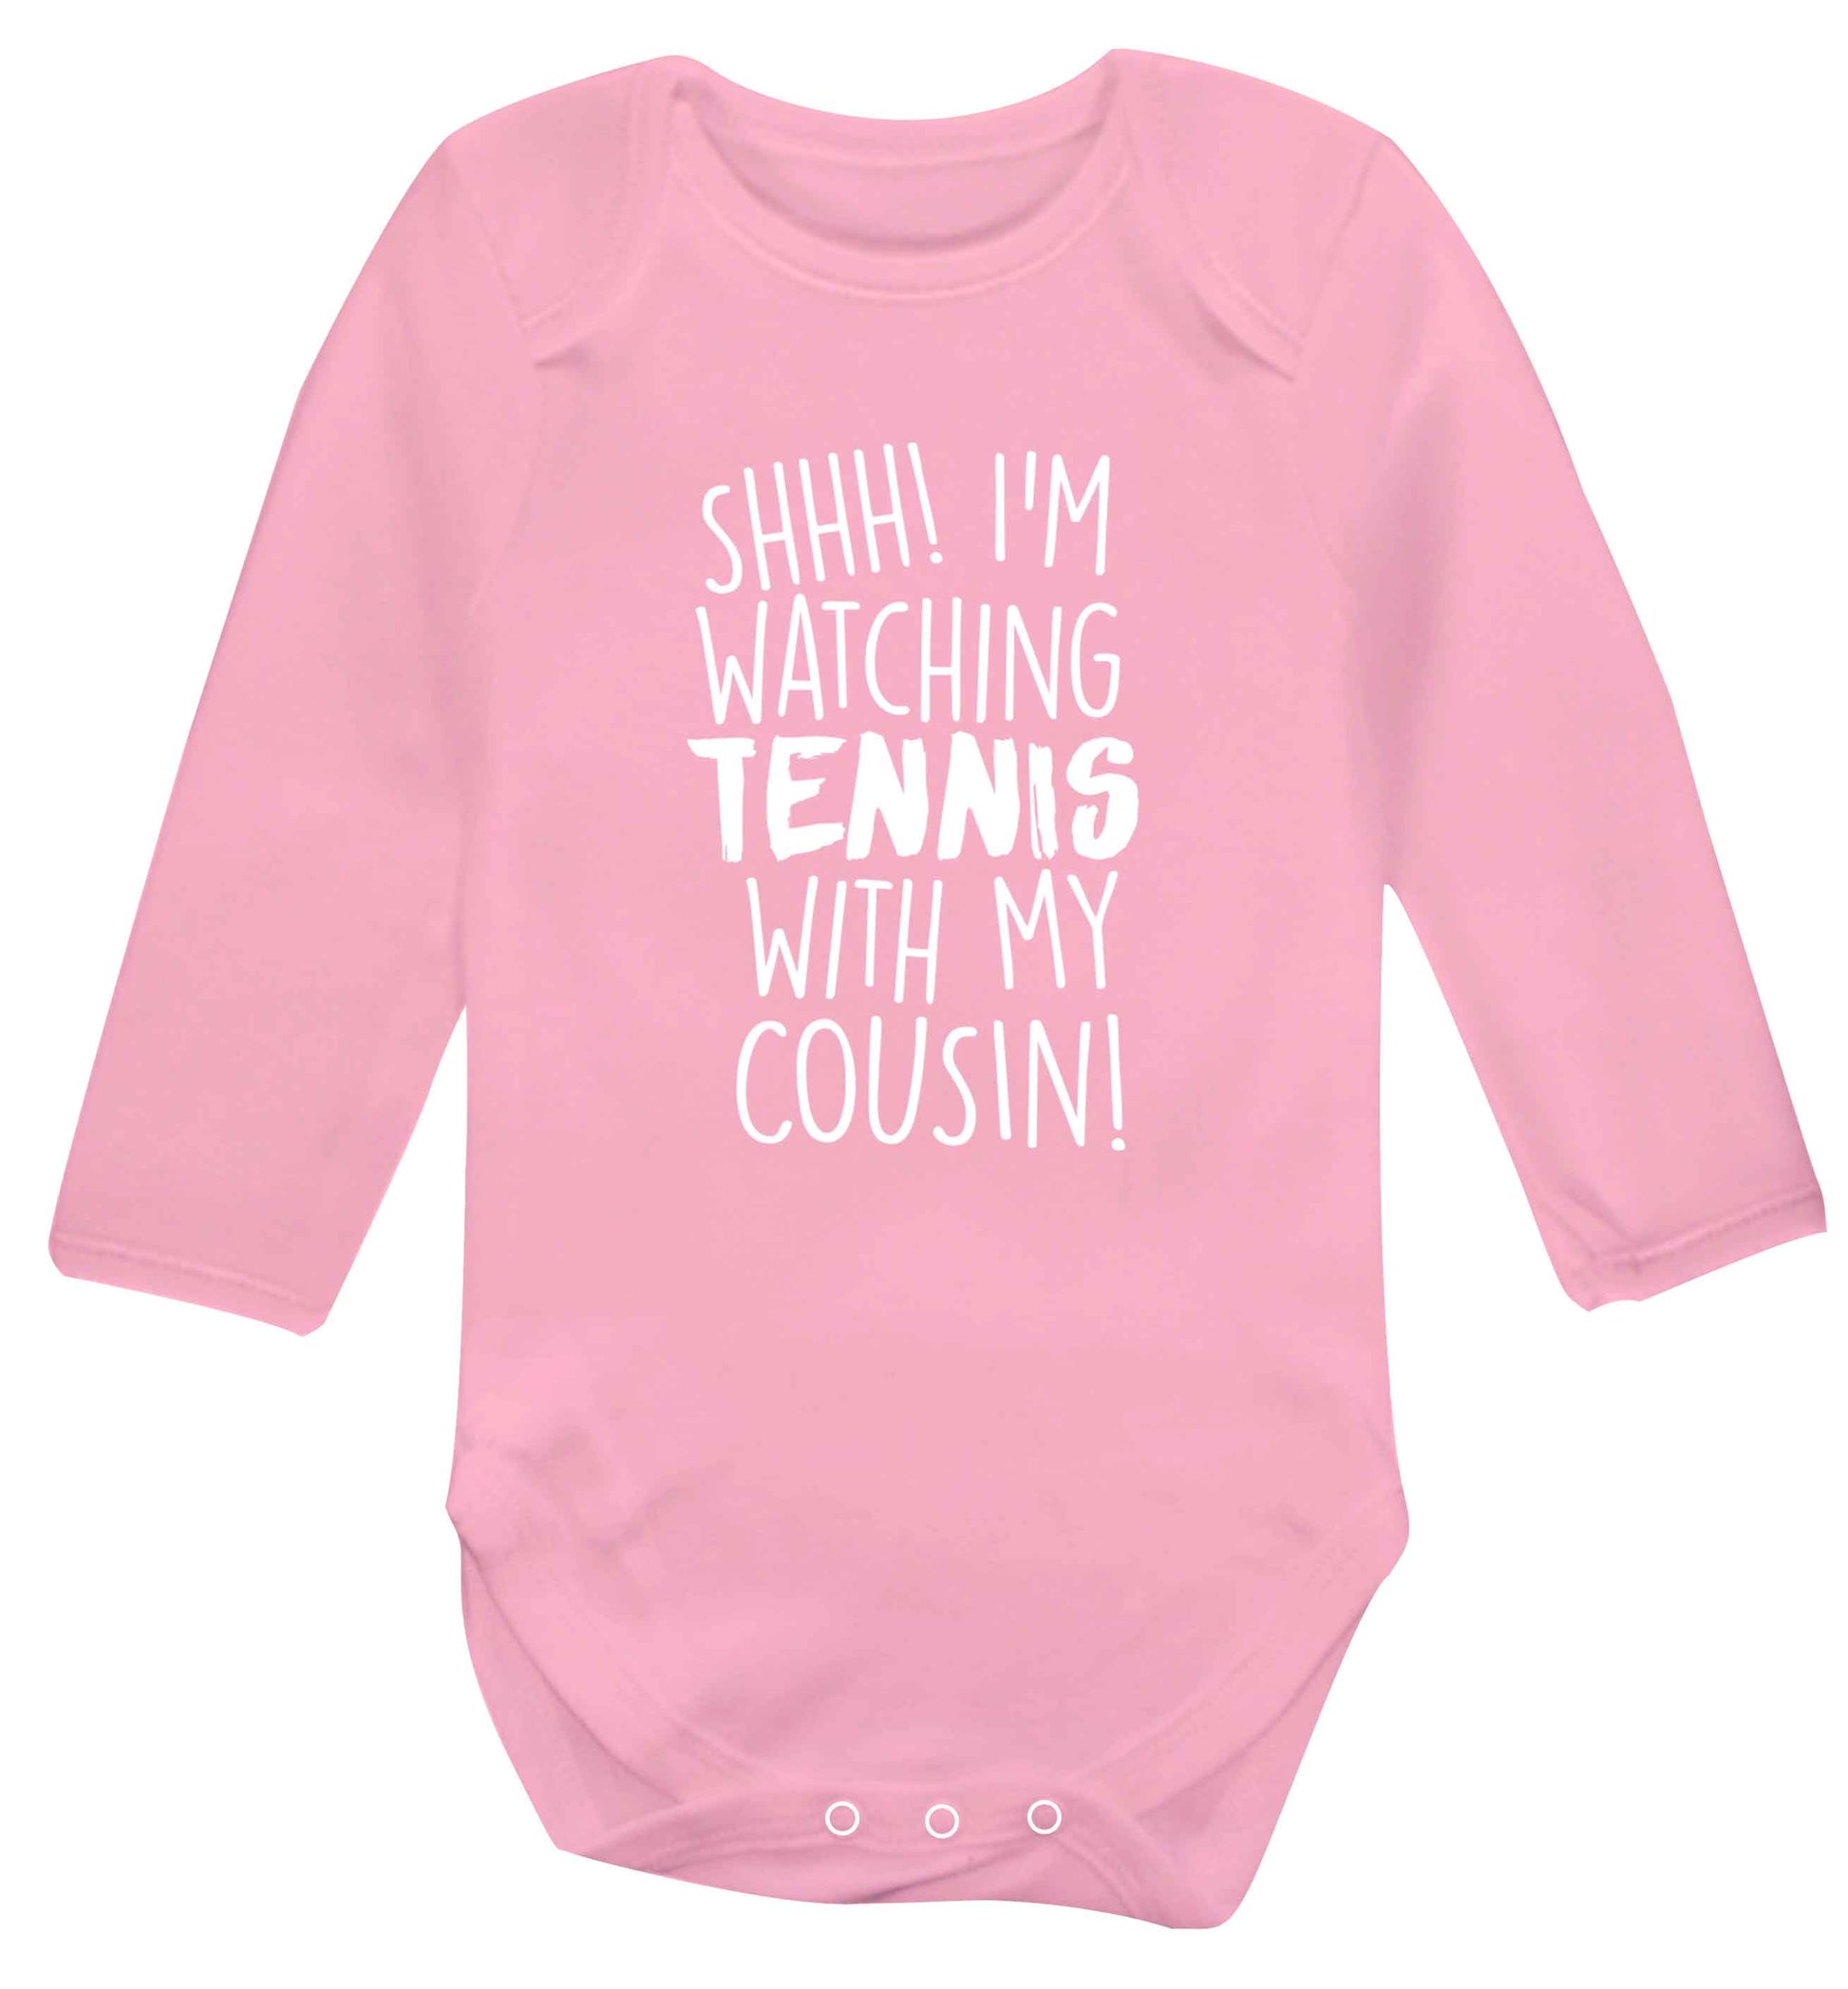 Shh! I'm watching tennis with my cousin! Baby Vest long sleeved pale pink 6-12 months